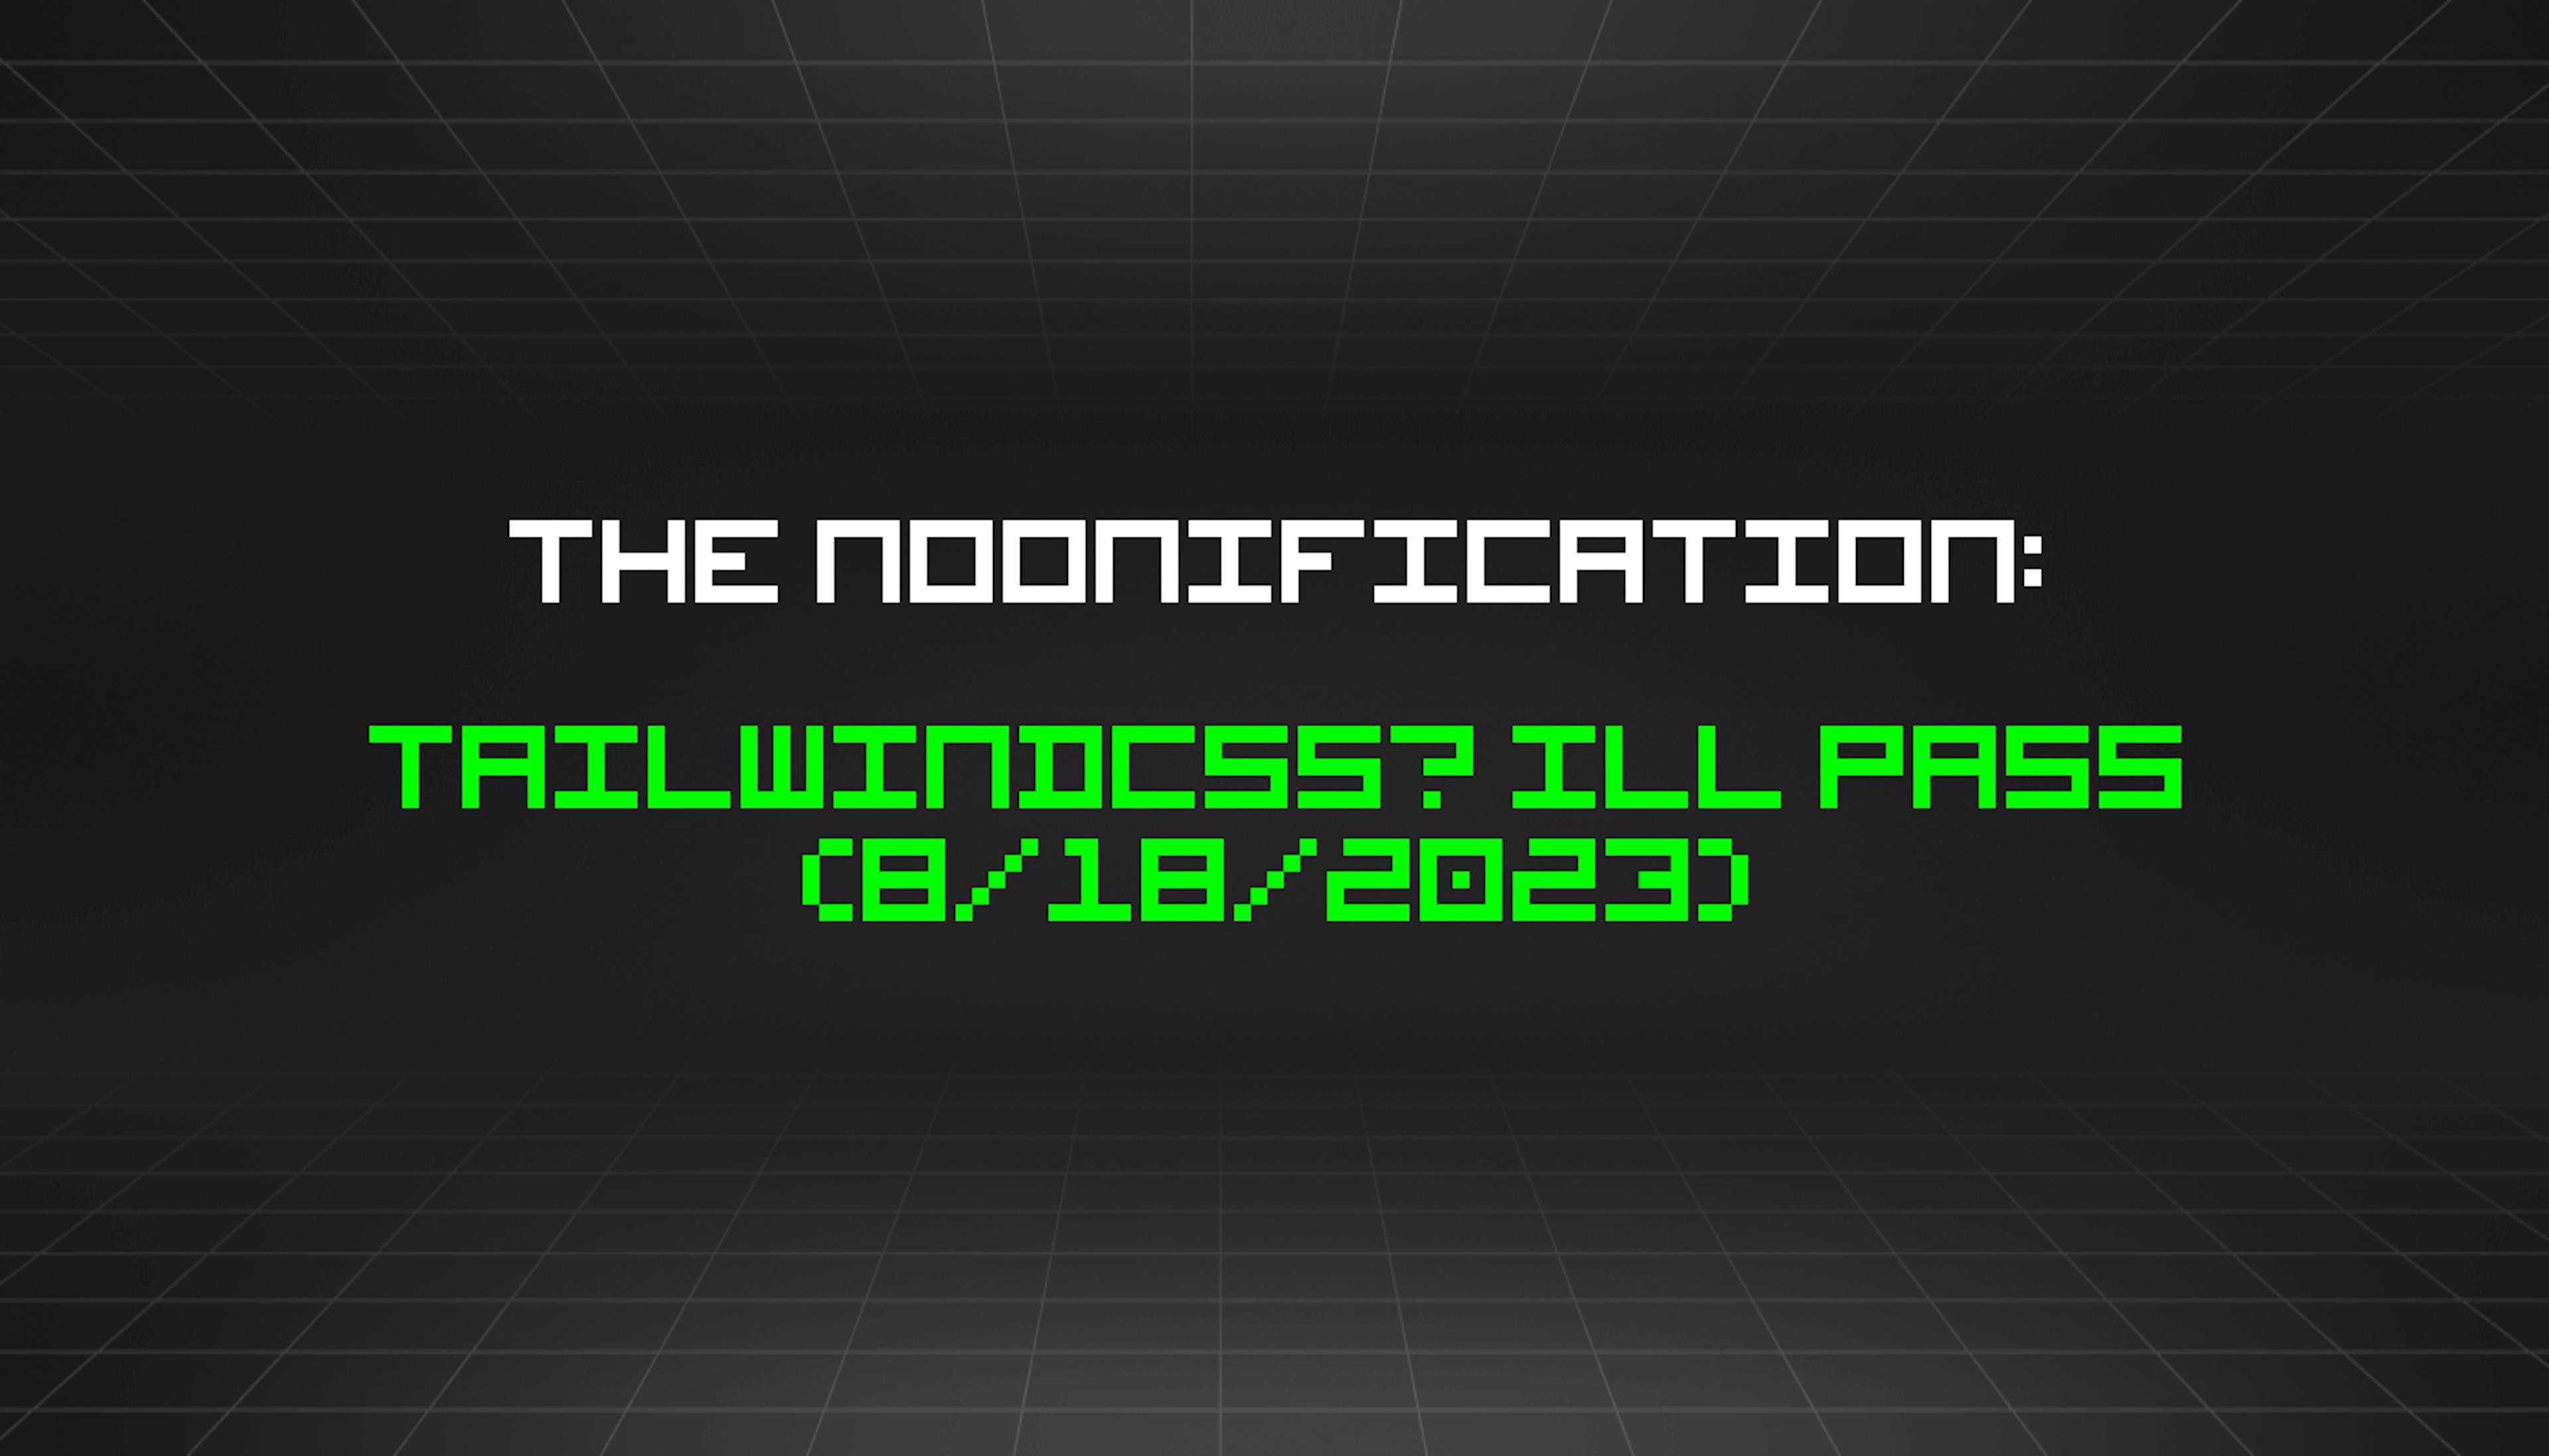 /8-18-2023-noonification feature image